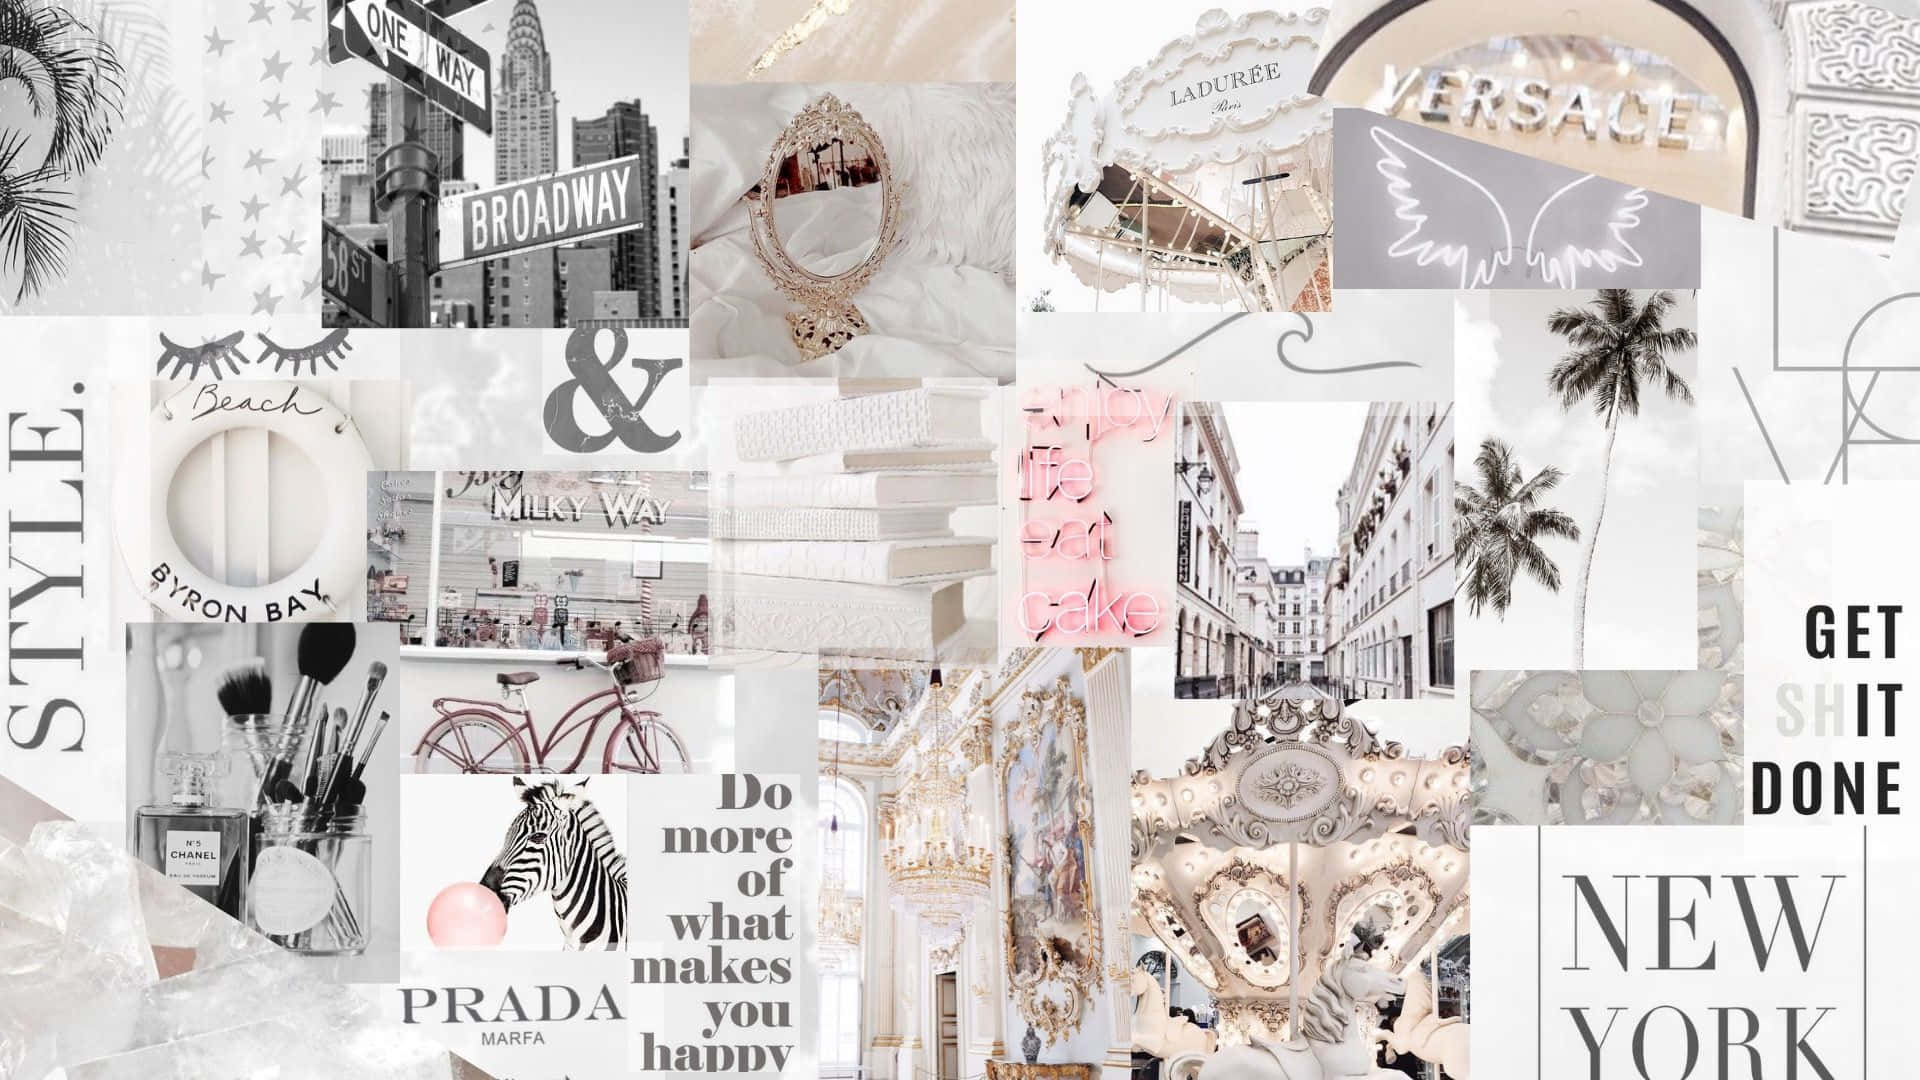 Collage of images, words, and phrases in black and white, with a pink purse in the center - Broadway